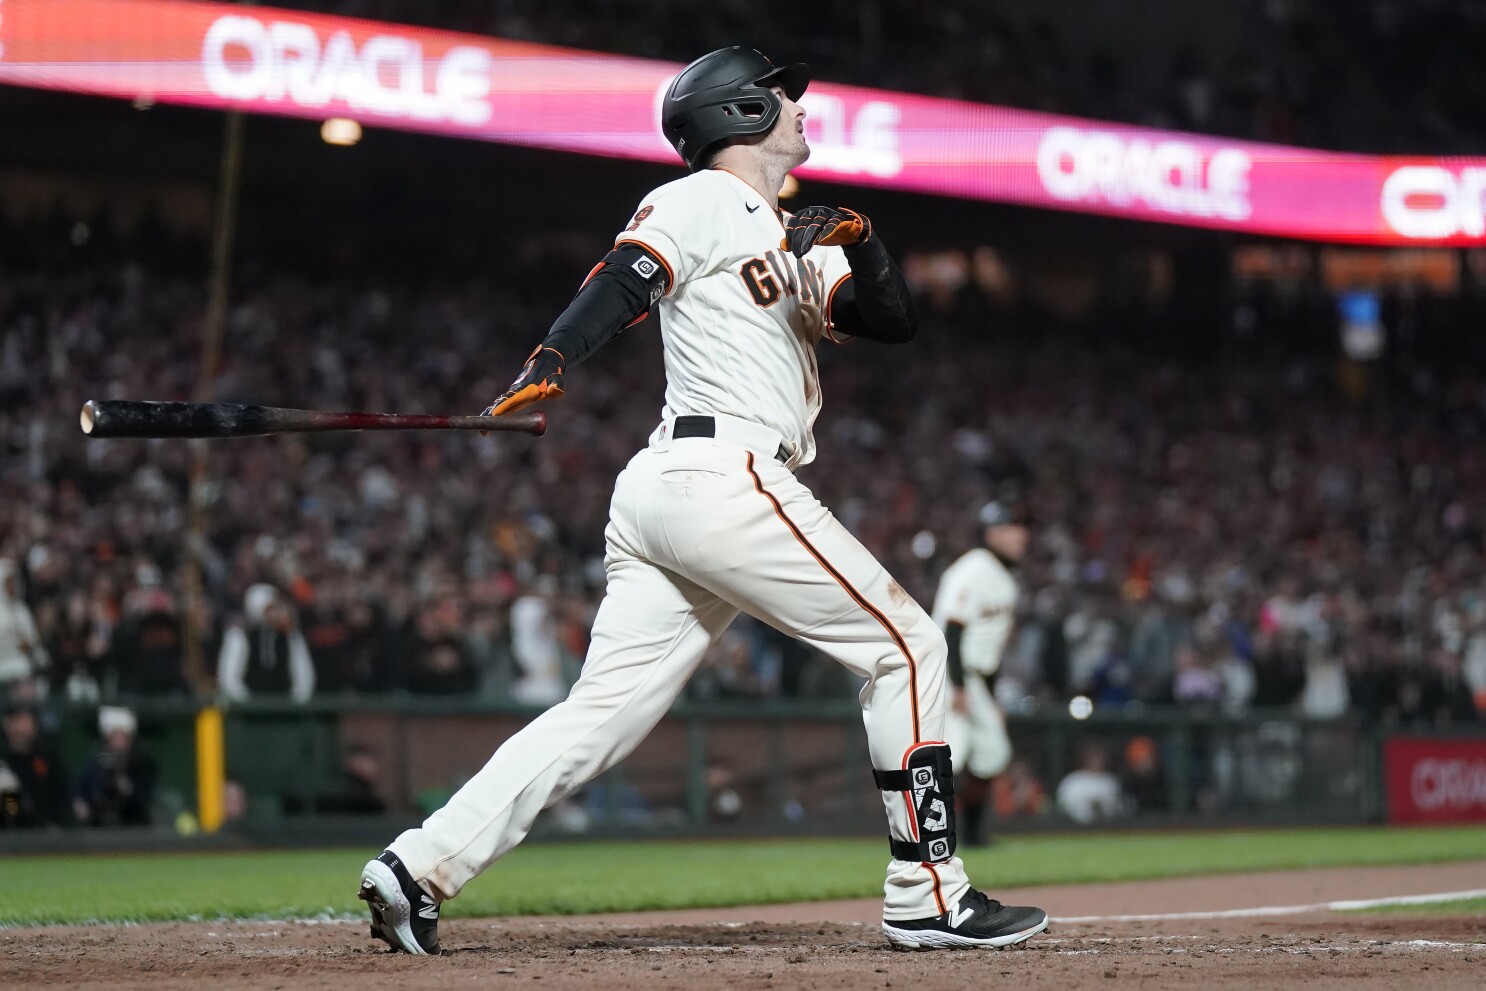 Yastrzemski splashes 3-run HR into McCovey Cove in the 10th as the Giants  rally past the Padres 7-4